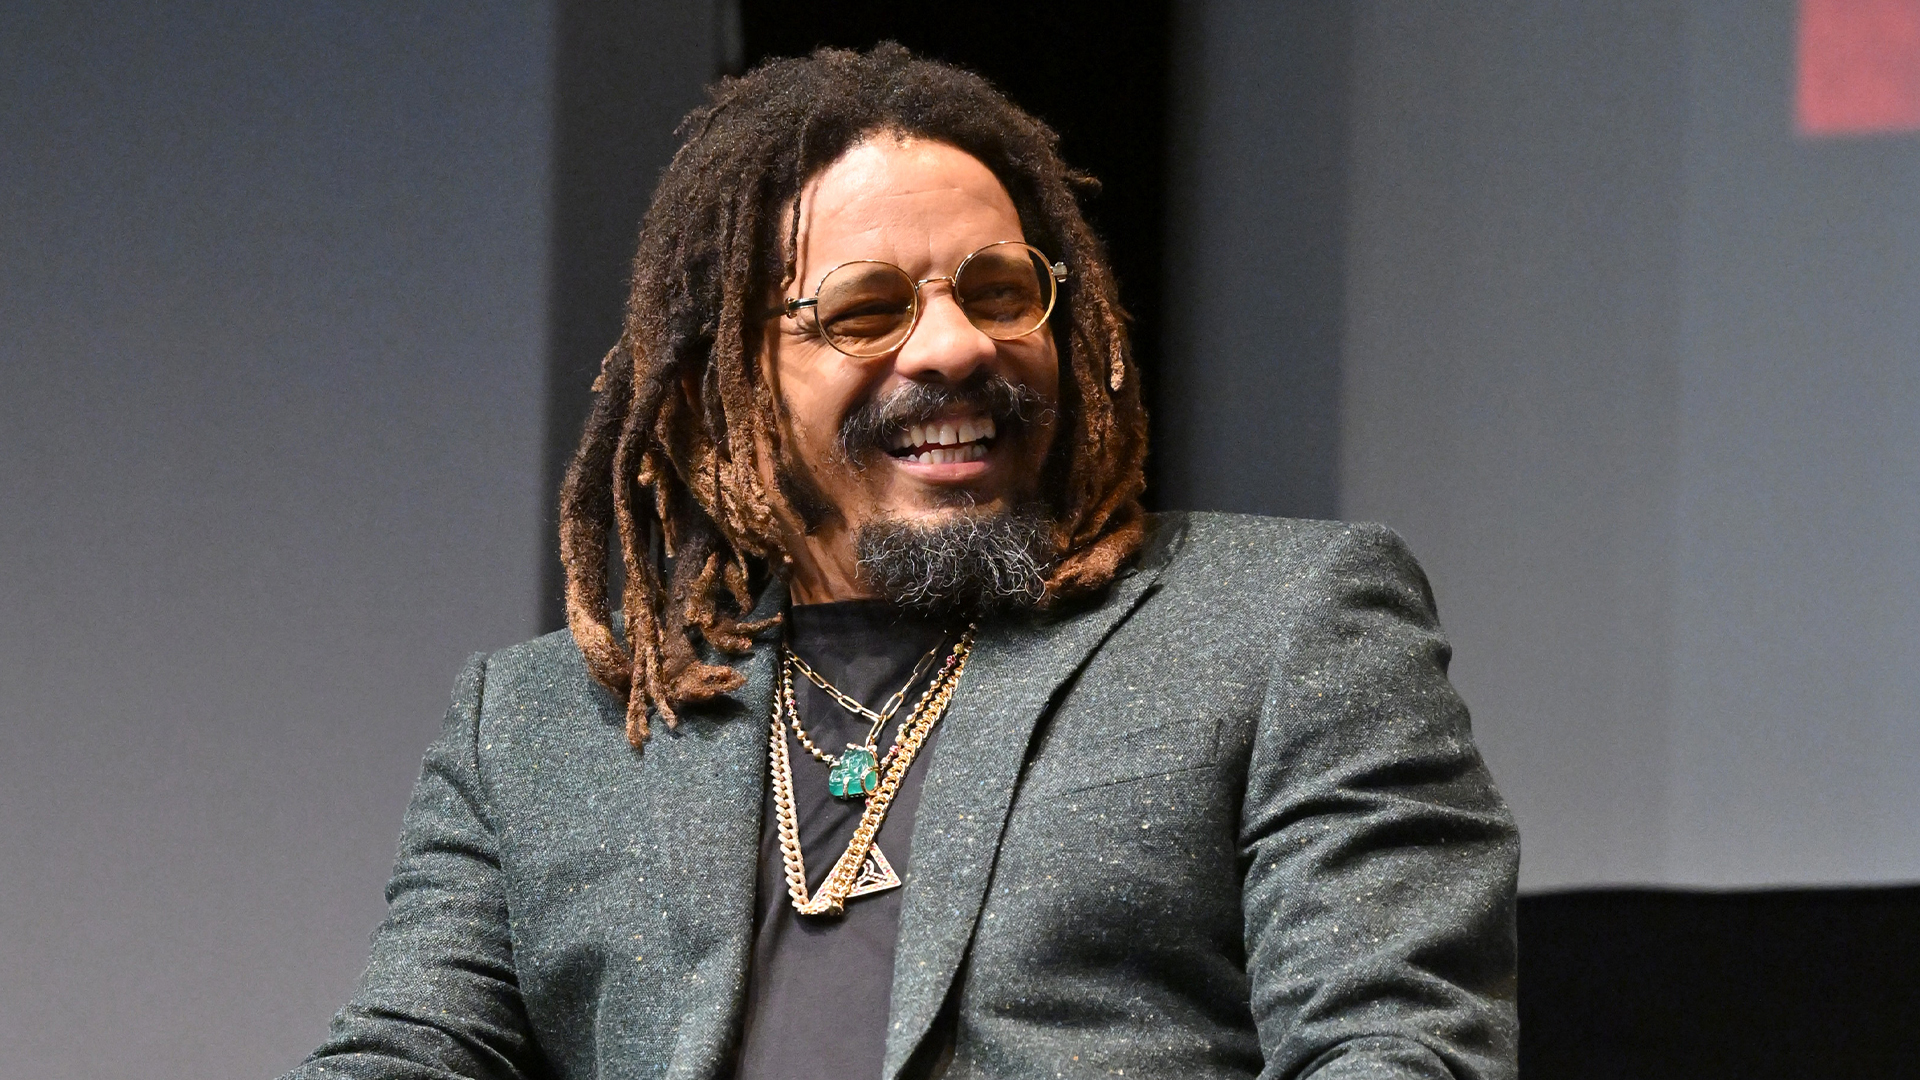 At Age 31, Rohan Marley Received An Ultimatum From Brother Ziggy Marley To Enter Into Business — Today, He Has An Empire Of Hotels, A Coffee Brand, And More